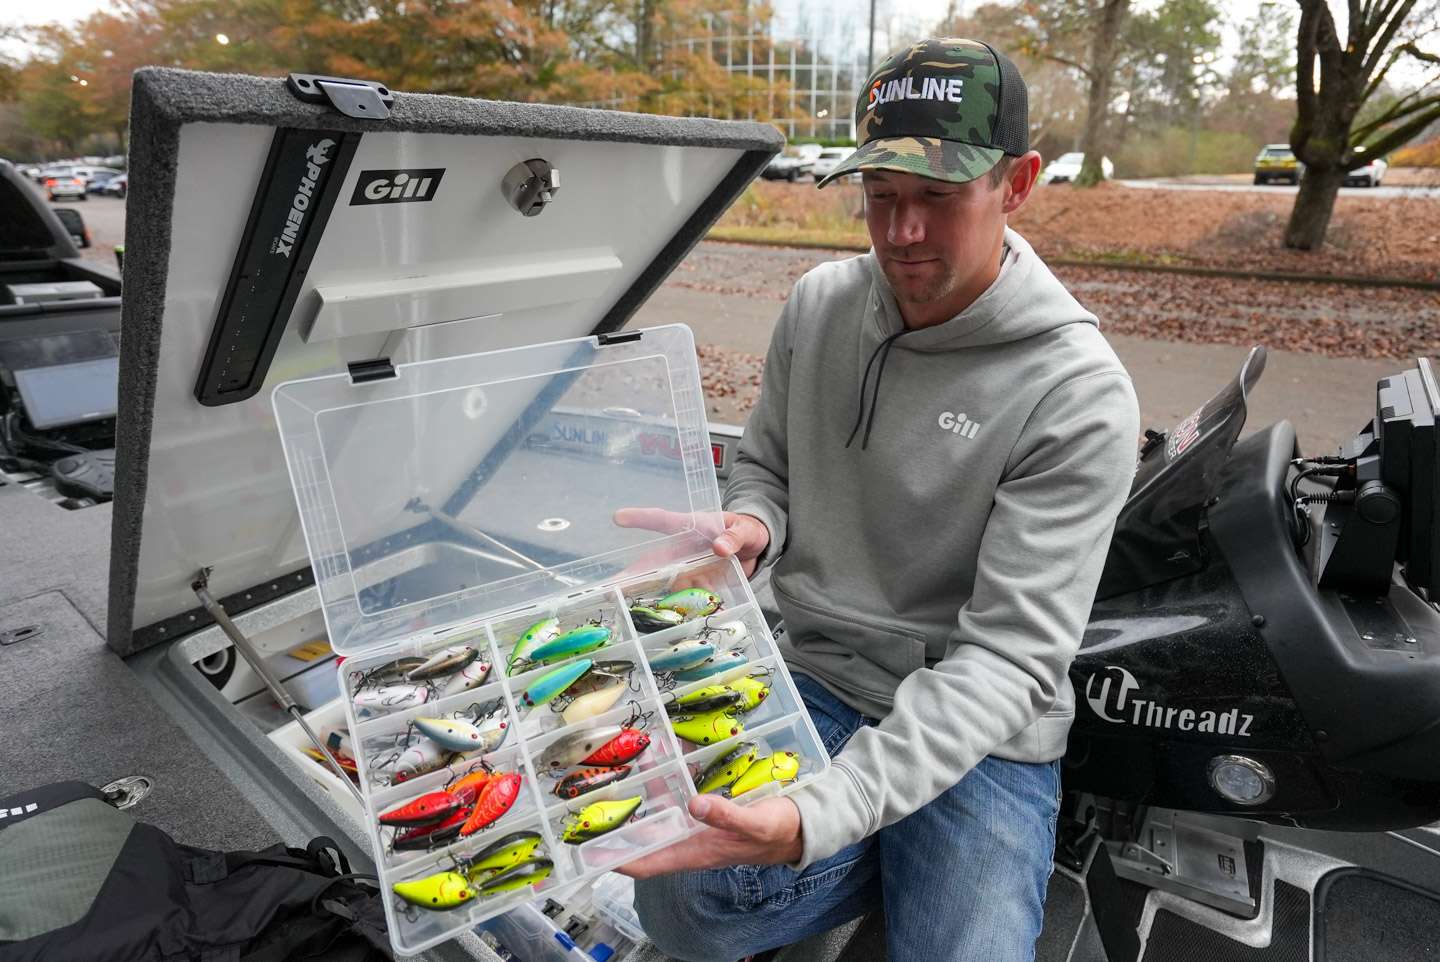 Being an Oklahoman, Palmer keeps a healthy amount of squarebill crankbaits in the boat.